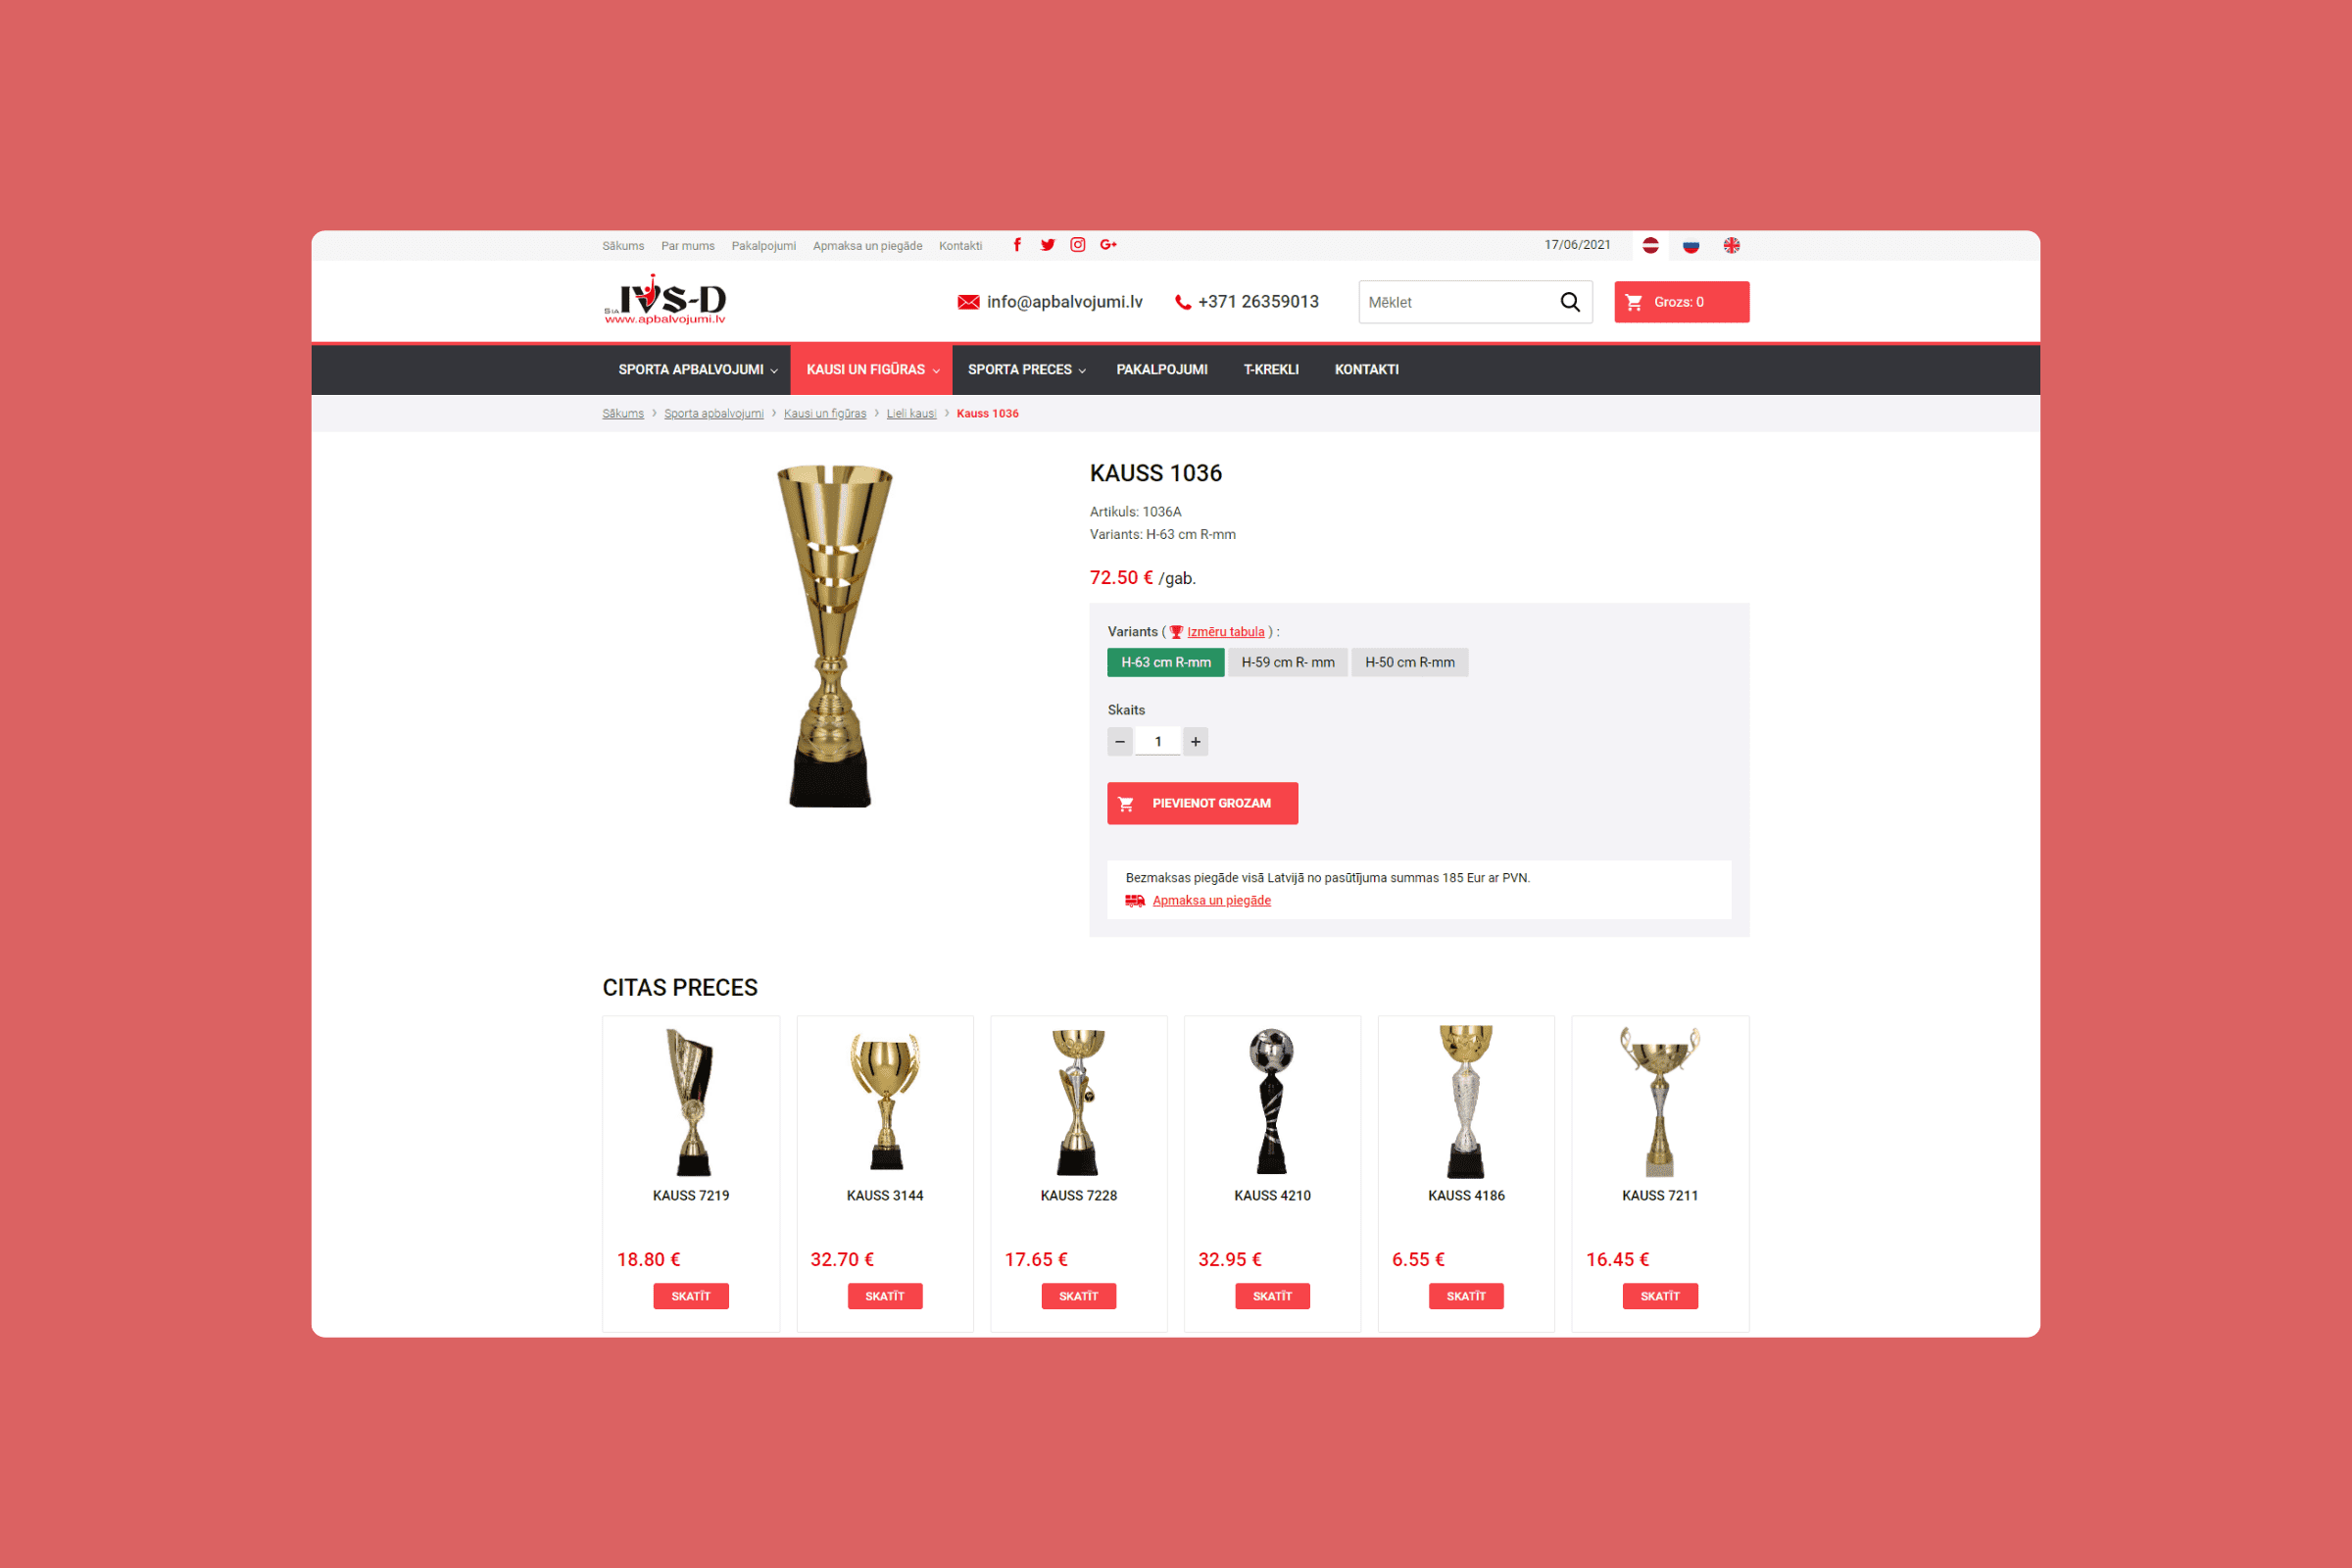 IVSD SIA awards online store